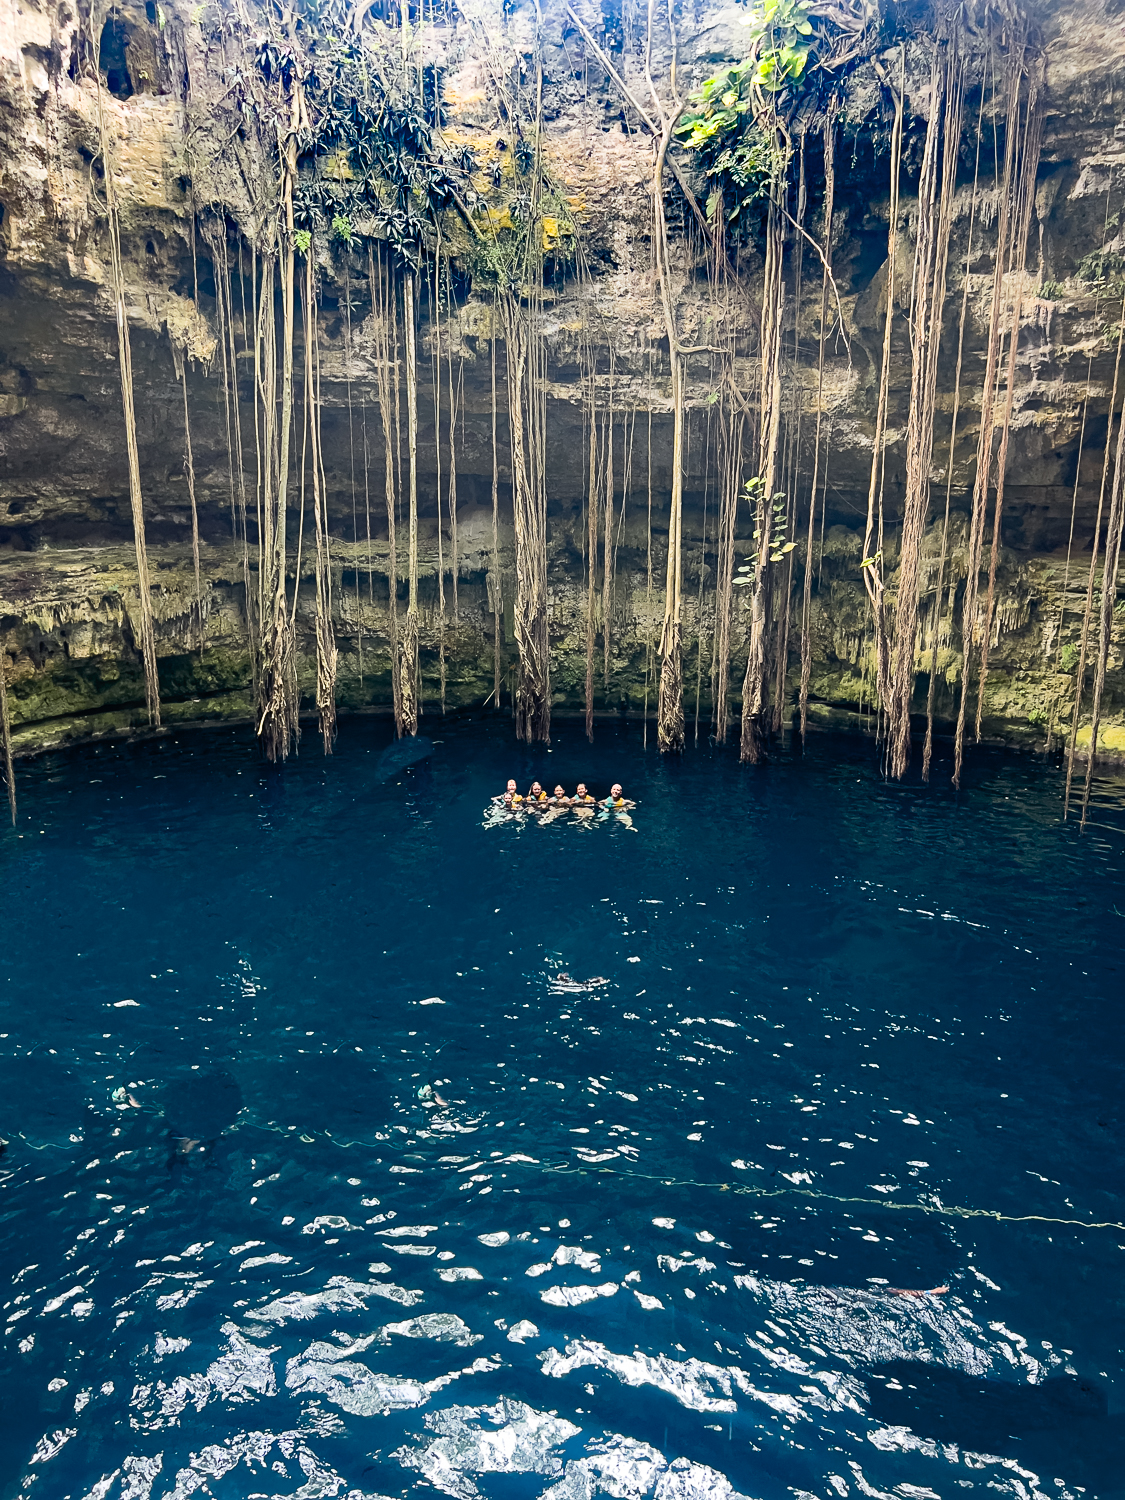 Pacific Globetrotters, budget family travel blog, shares the Best Cenotes In Cancun. San Lorenzo Oxman